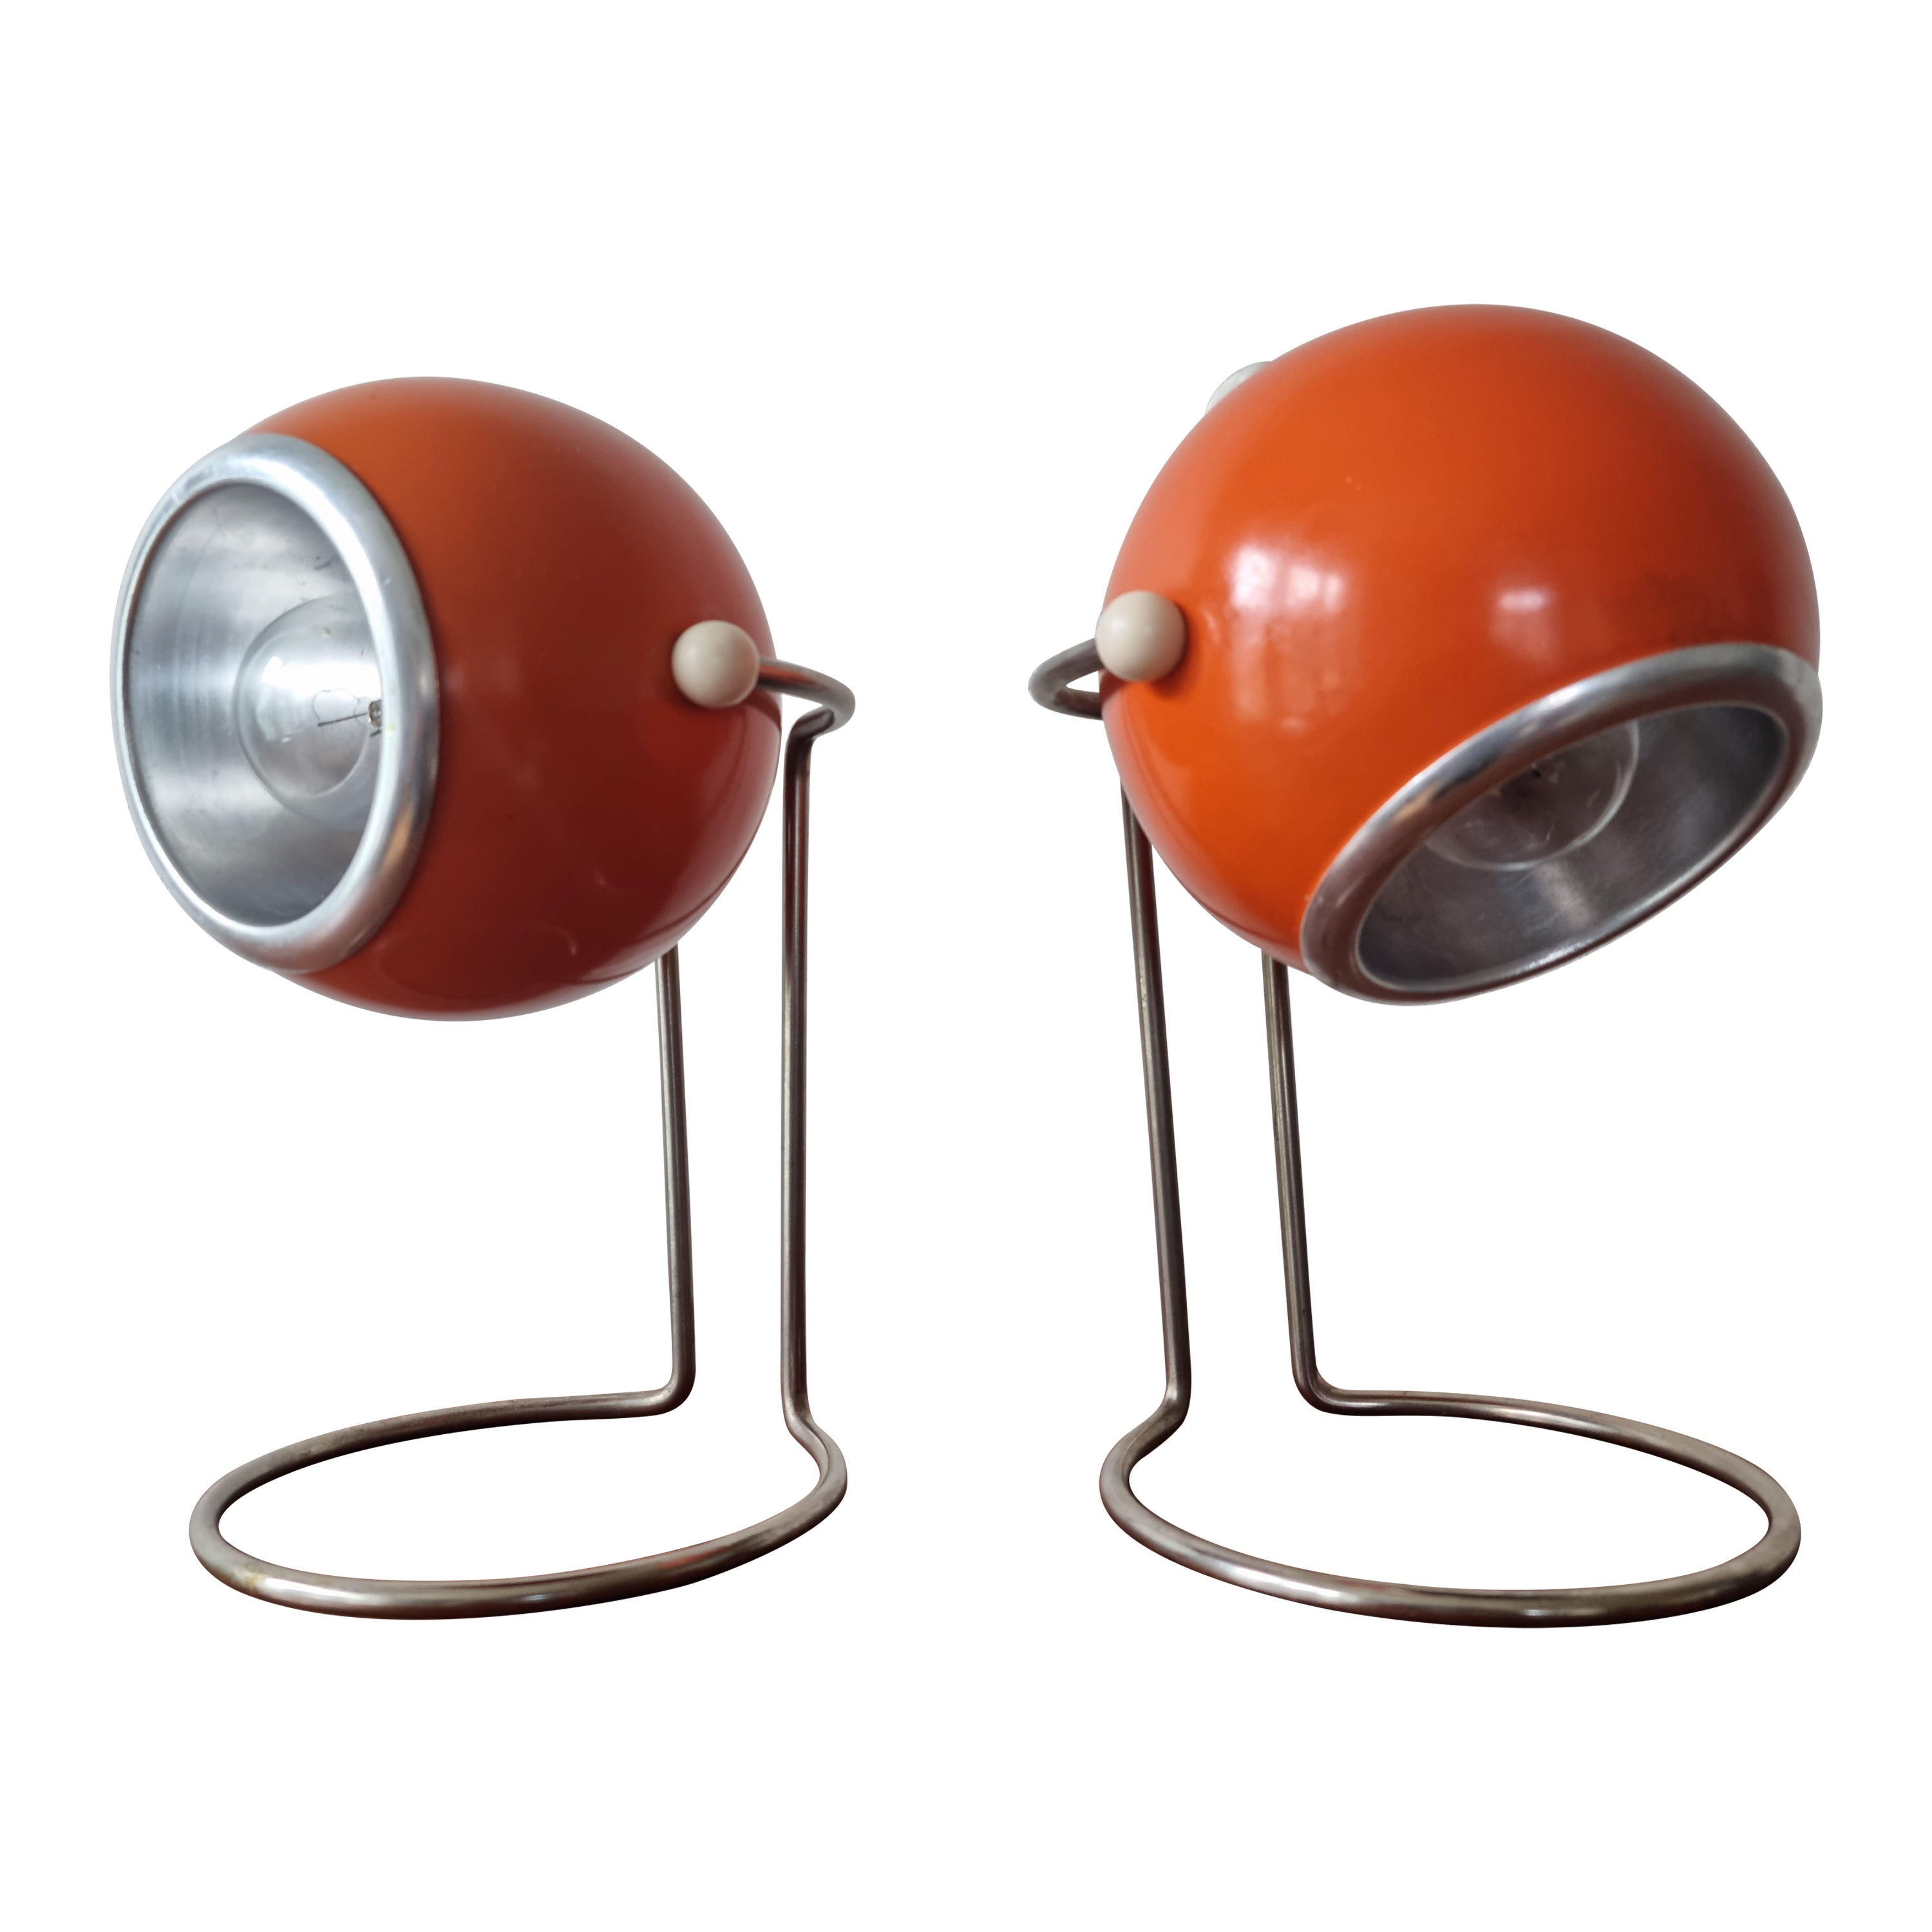 Pair of Midcentury Table Lamps, Eye Ball, 1970s For Sale